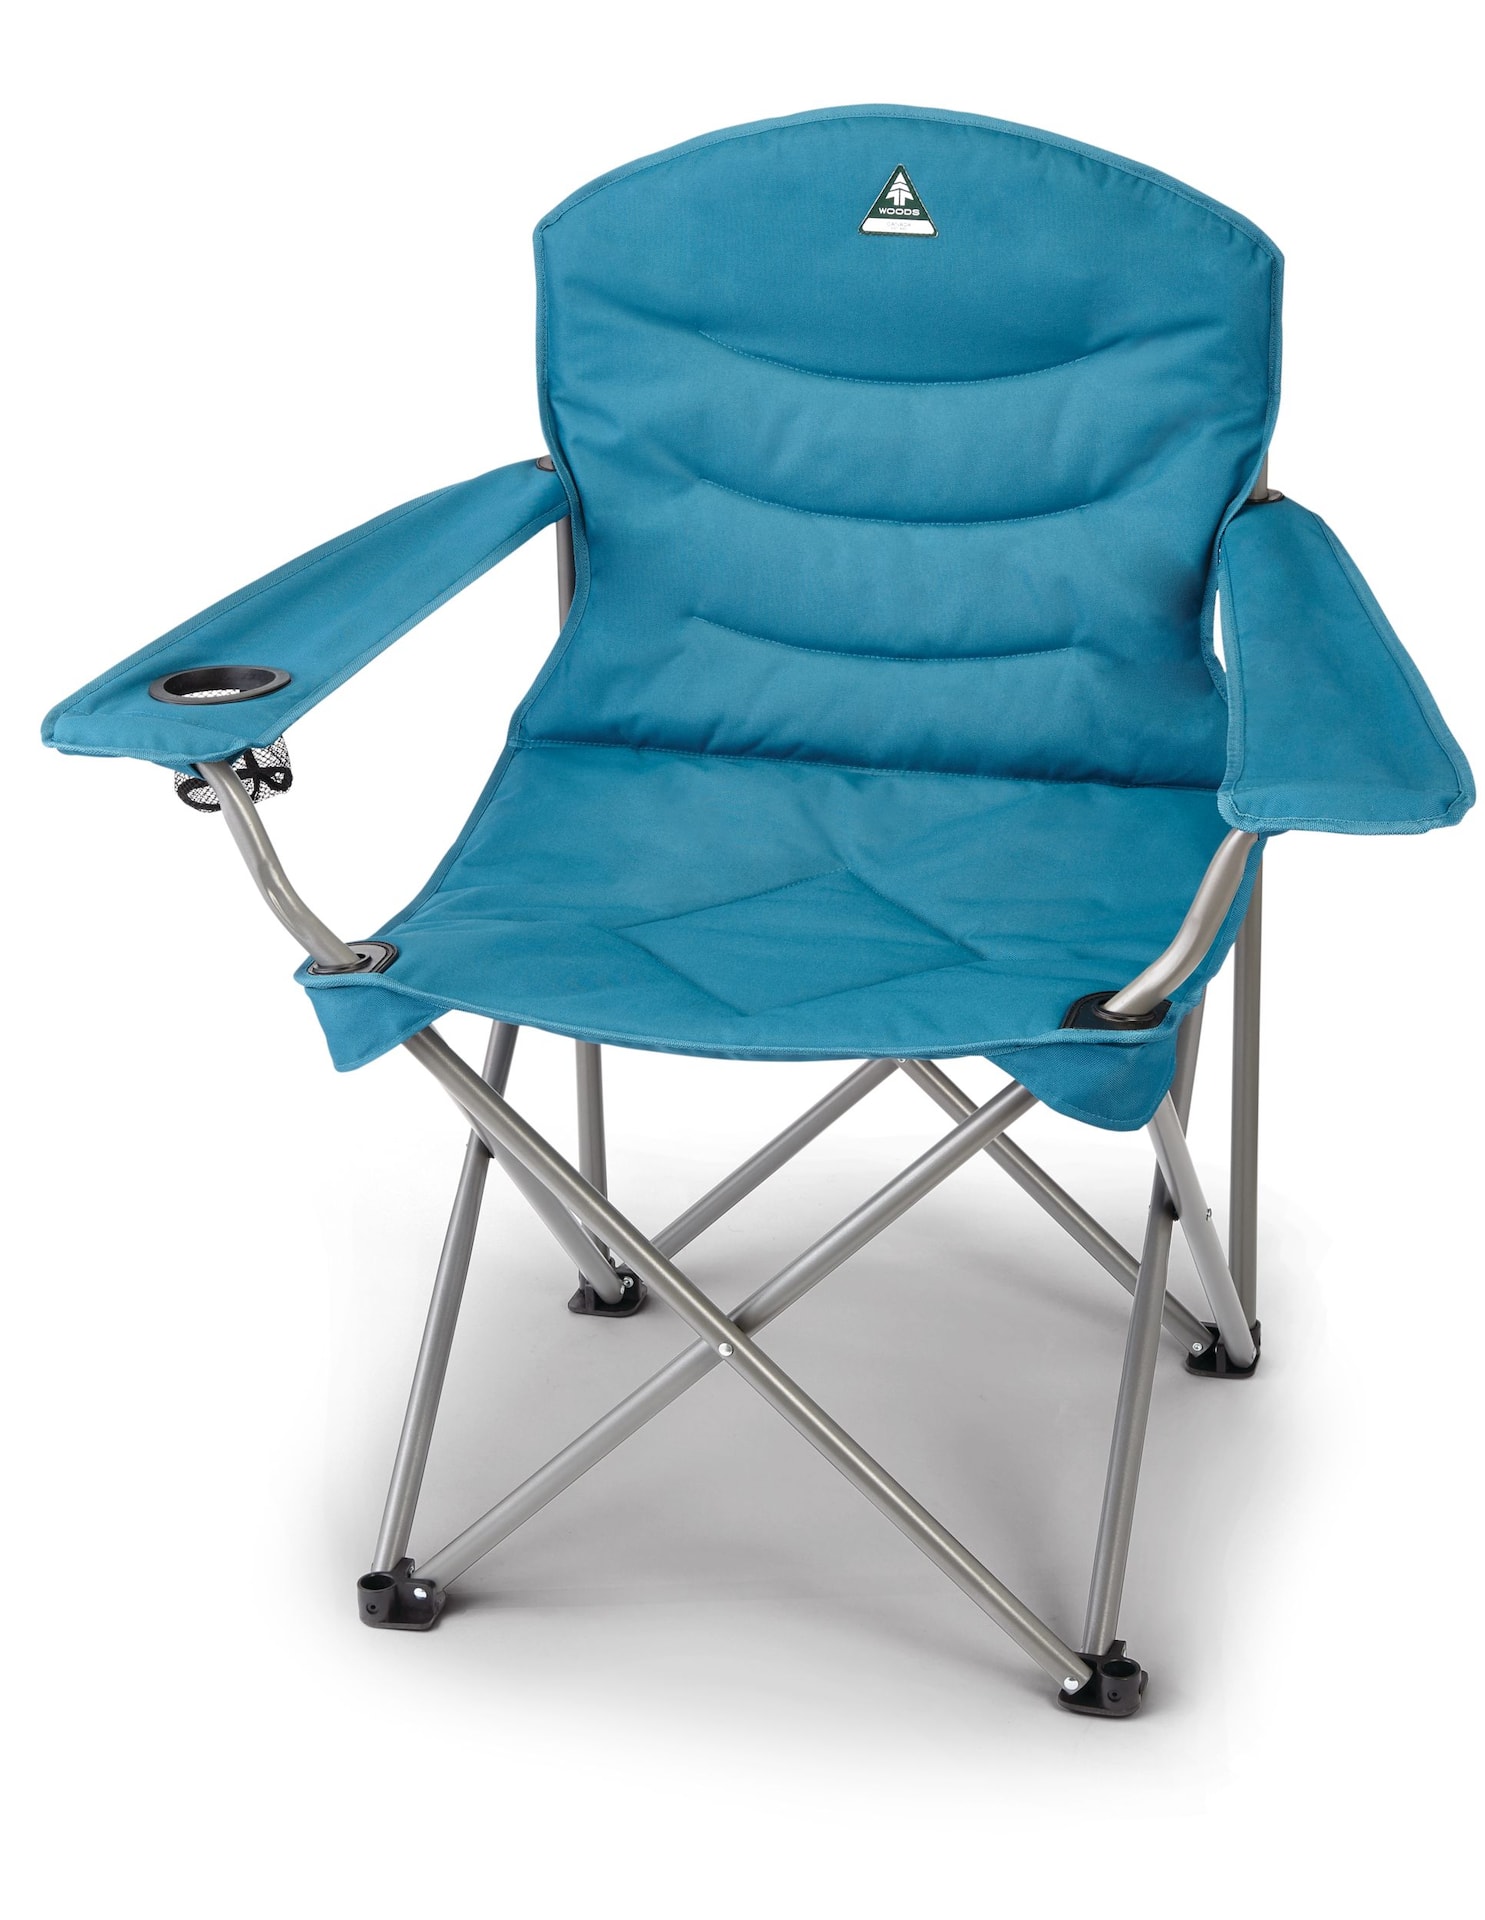 https://media-www.canadiantire.ca/product/playing/camping/camping-furniture/0765547/woods-oversize-chair-741d677b-d38e-4faa-a5d4-706b3c886604-jpgrendition.jpg